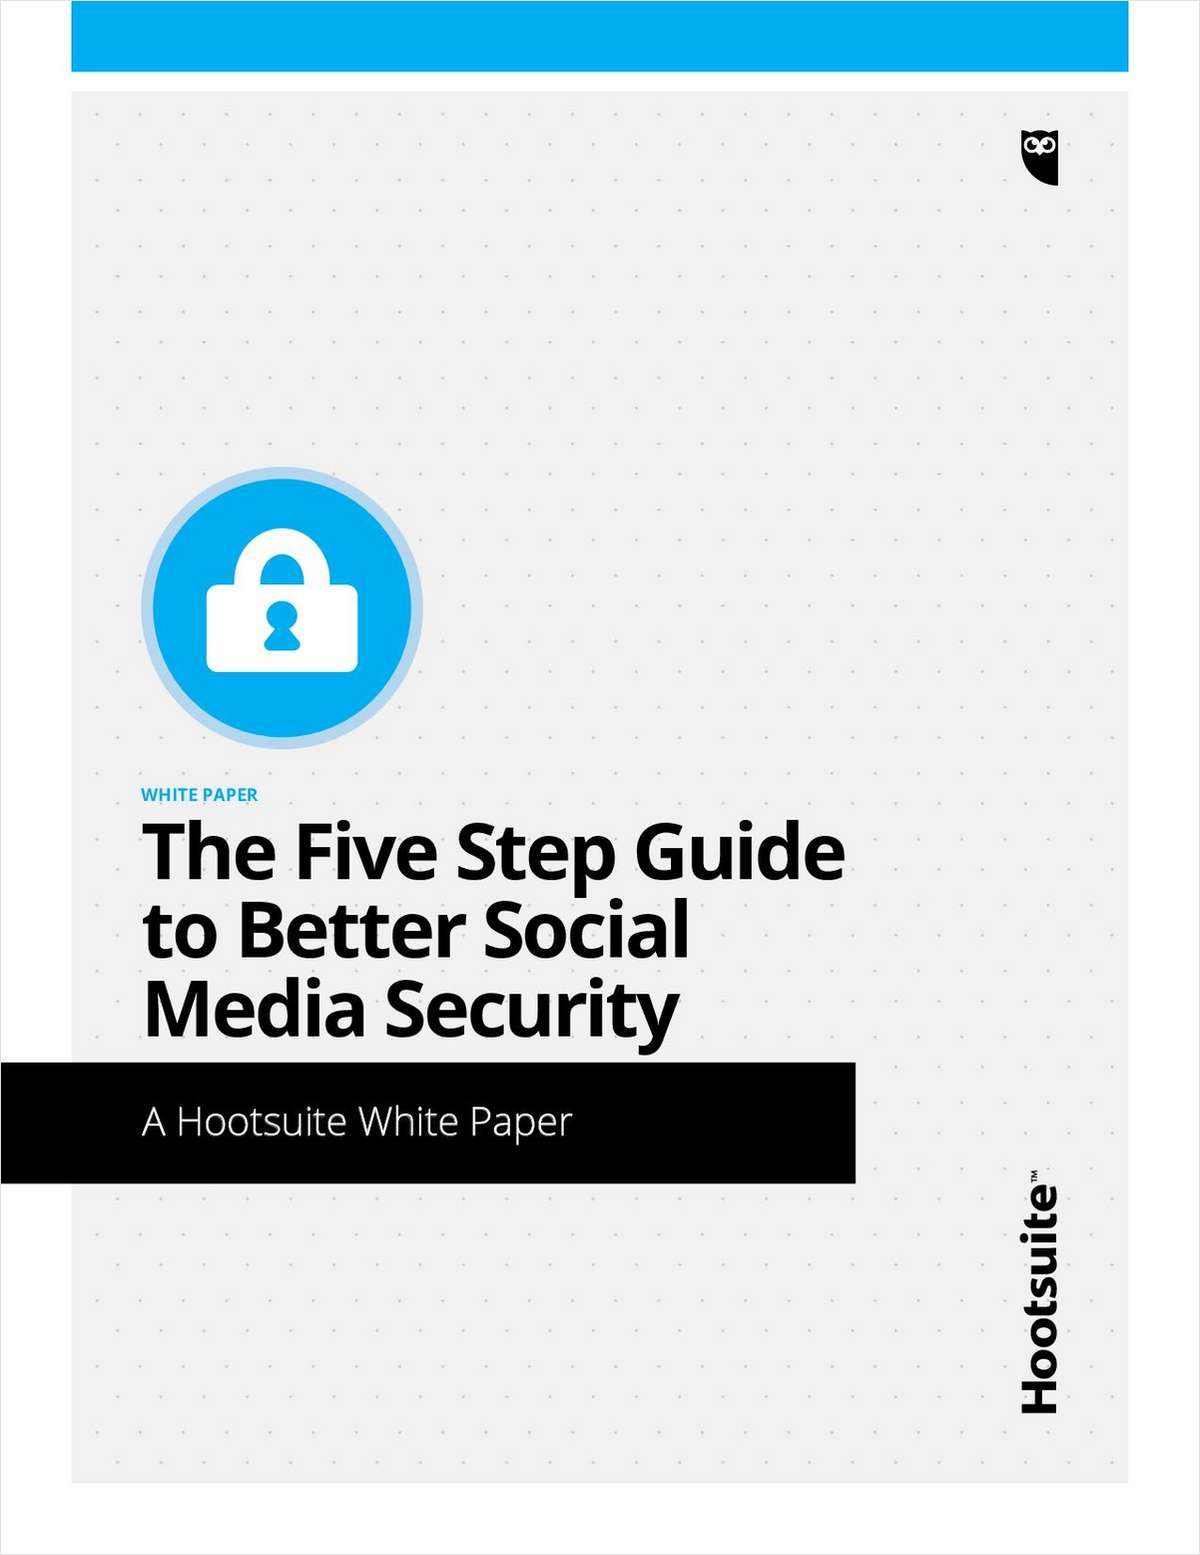 The Five Step Guide to Better Social Media Security